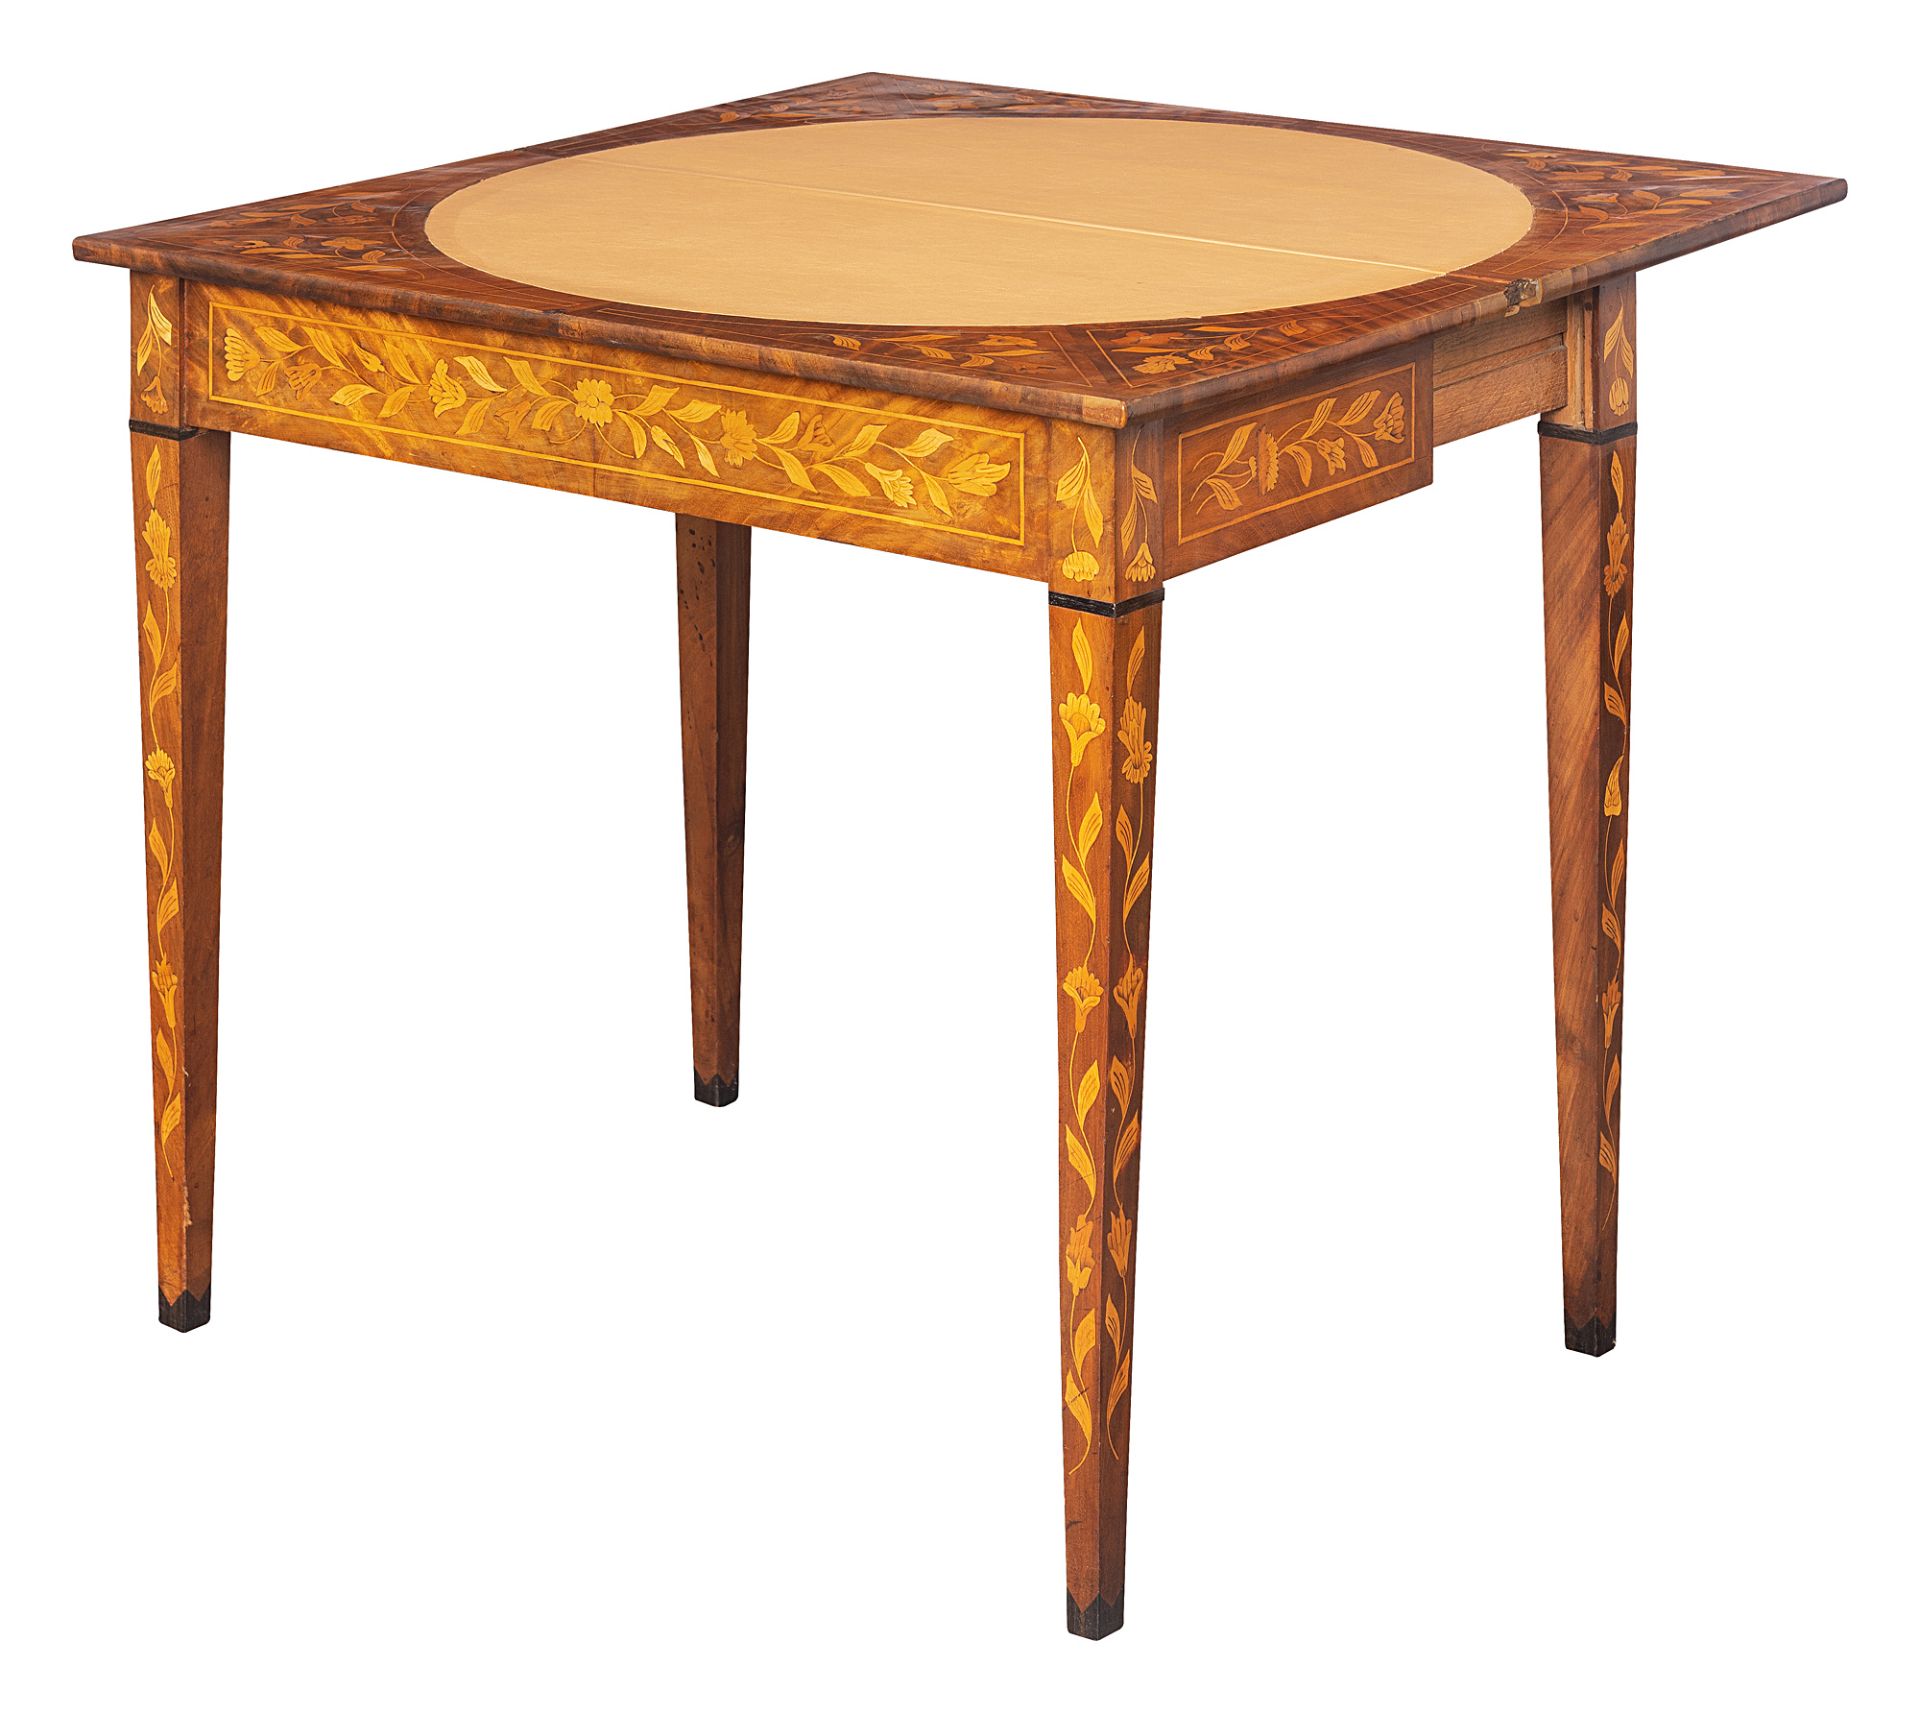 Dutch games table with flower intarsia - Image 2 of 3